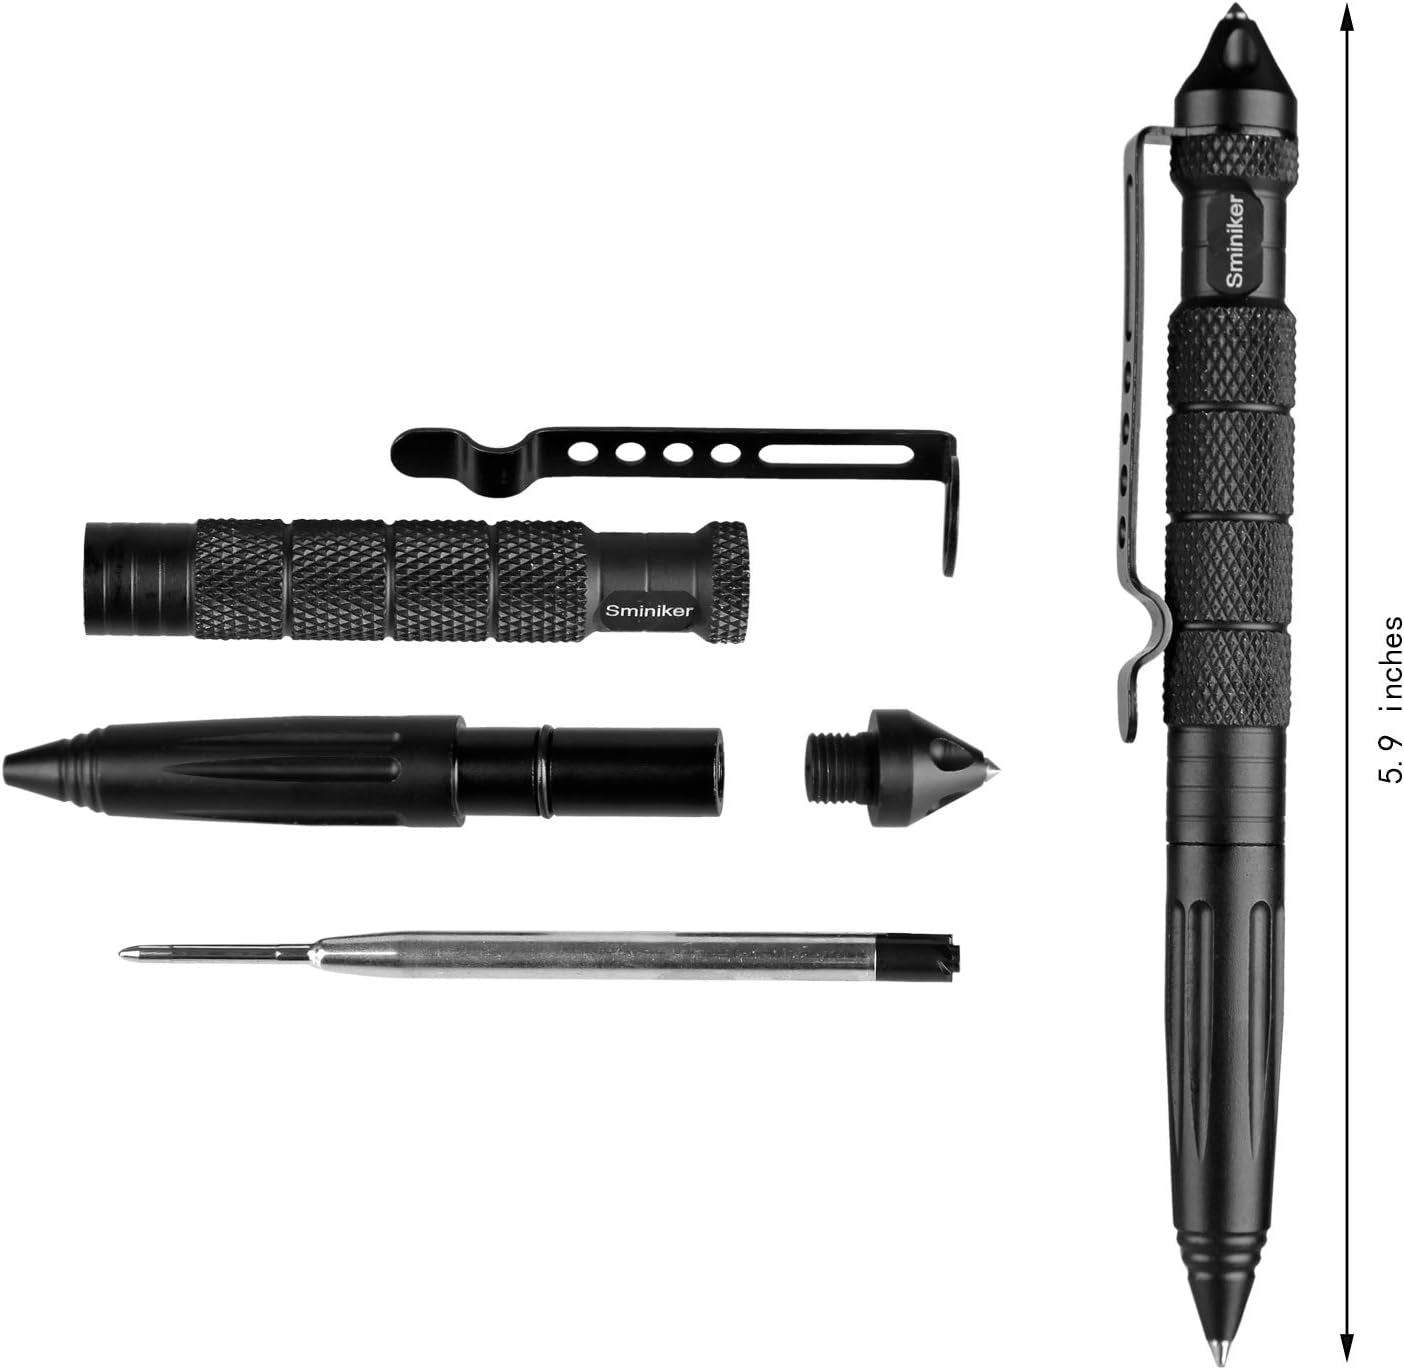 Tactical Pen with 6 Ink Refills Aircraft Aluminum Pen with Glass Breaker Writing Multifunctional Tool (Black)